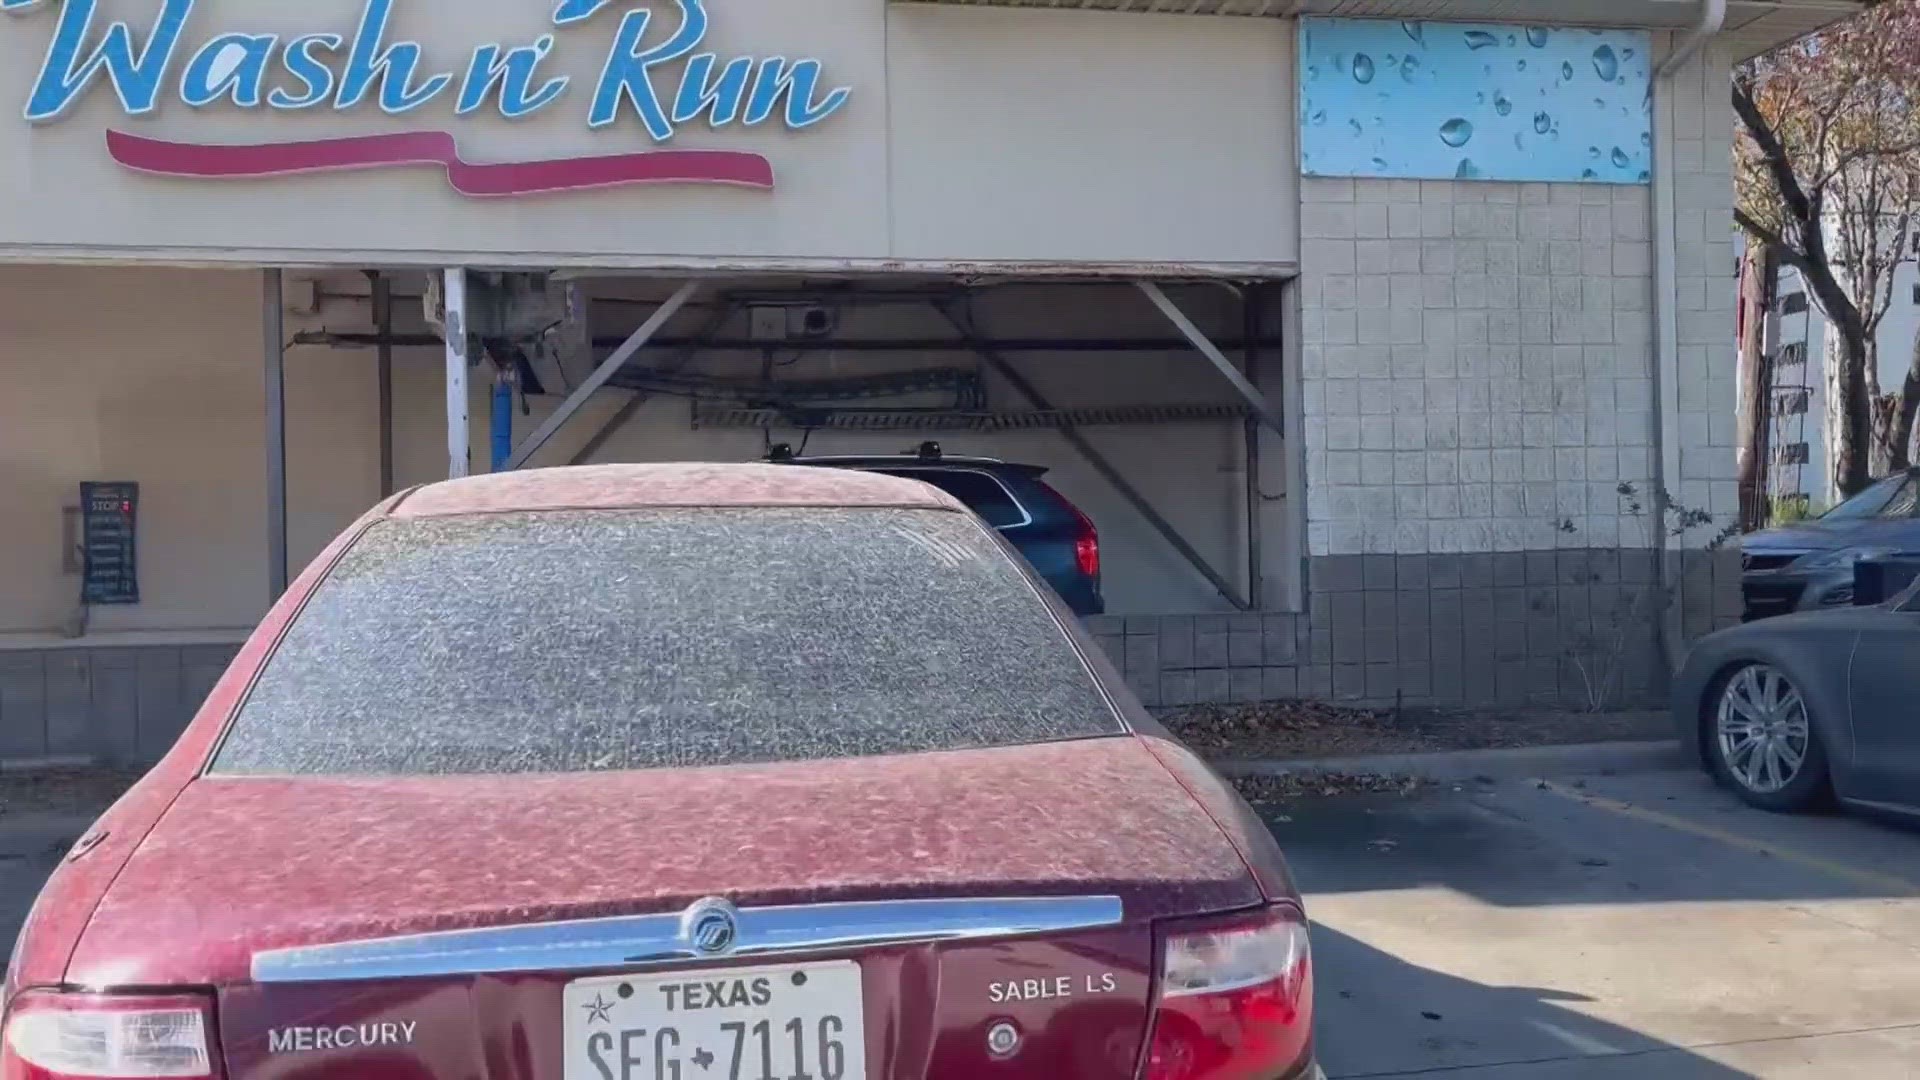 Following Monday's severe storms, Houstonians woke up to dirt-filled cars.